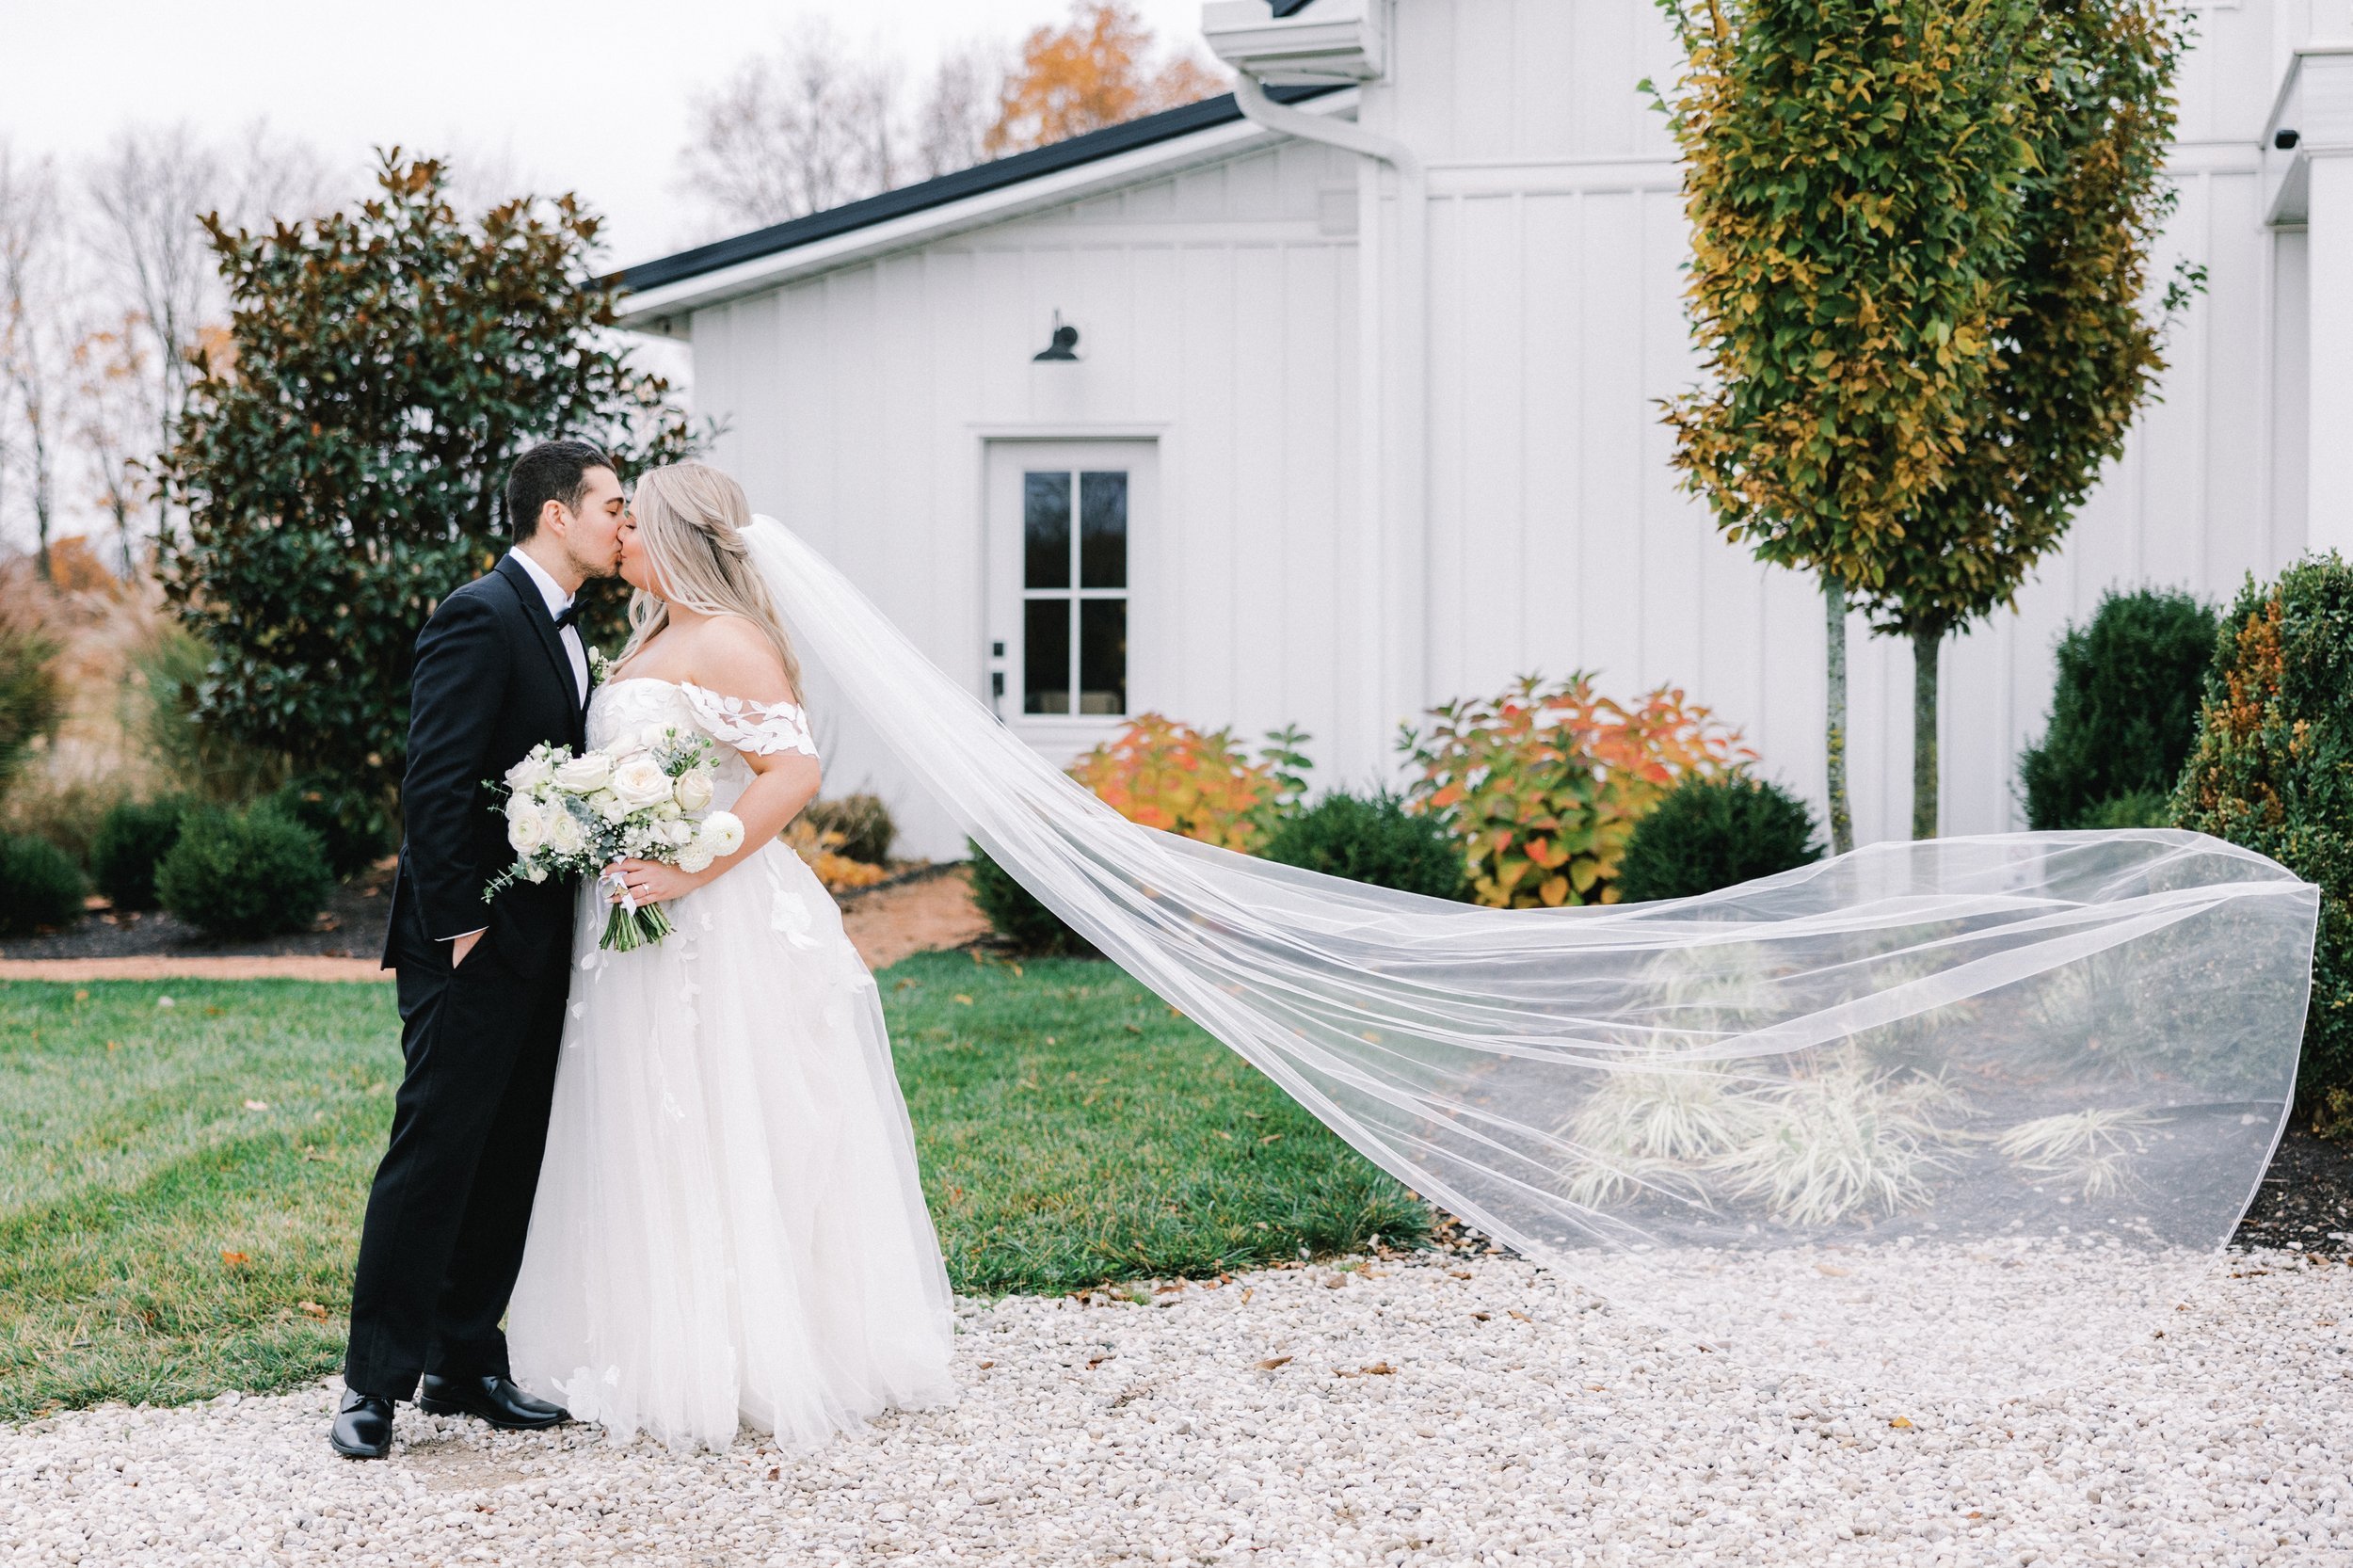 savannah-bride-jessica-in-hattie-lane-by-rebecca-ingram-an-a-line-bridal-gown-with-plunging-neckline-and-oversized-floral-lace-purchased-from-savannah-bridall-shop-ivory-and-beau-6.jpg